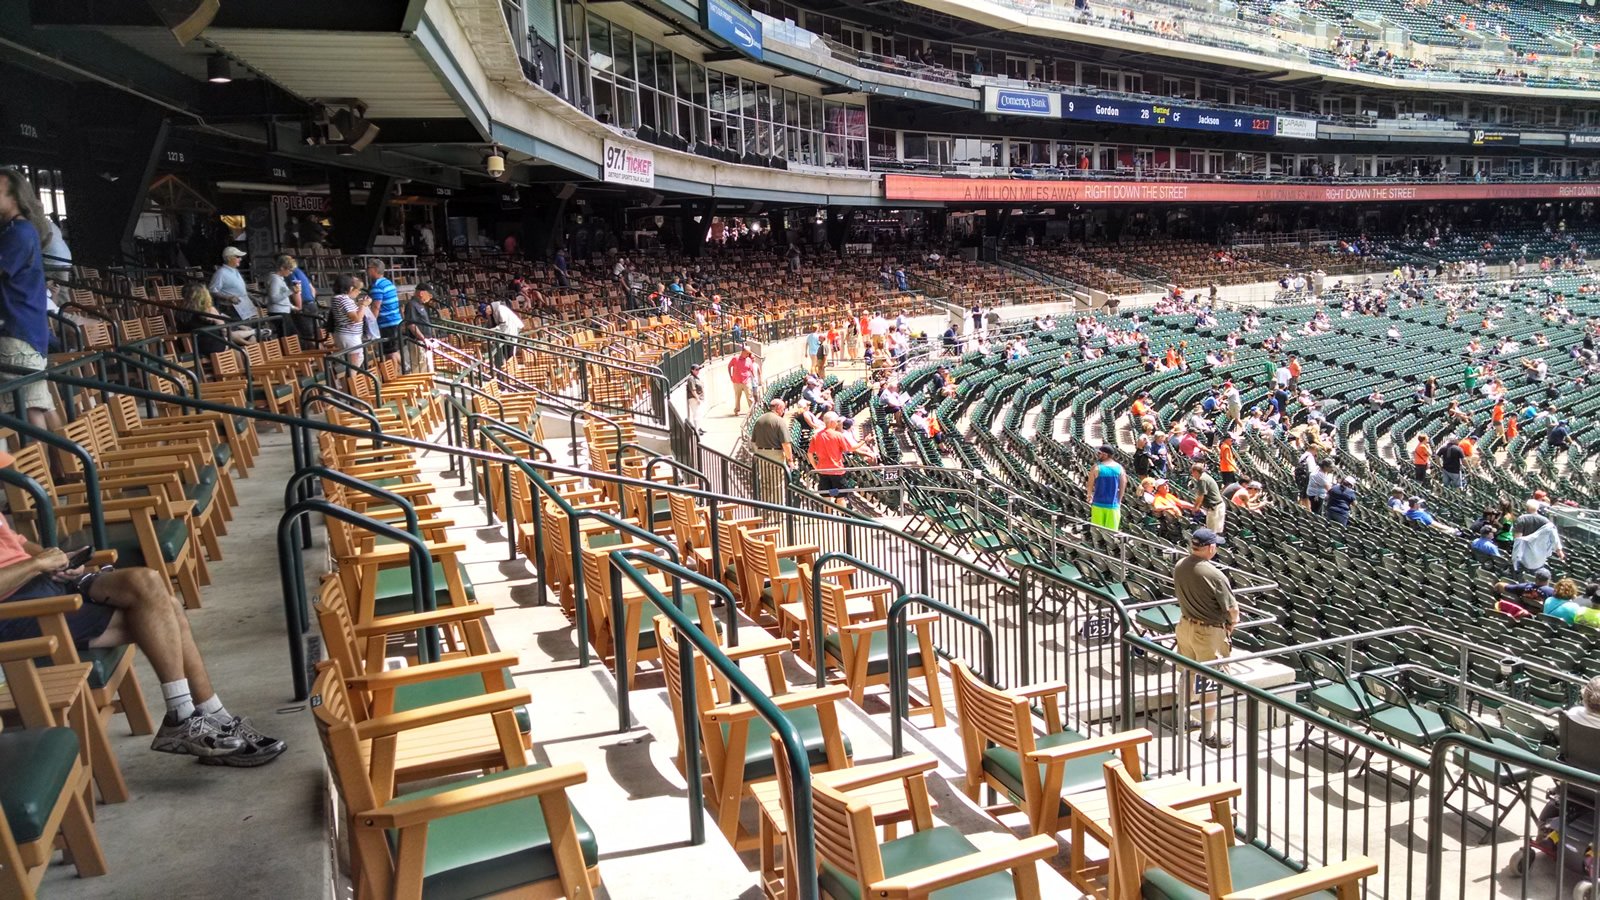 The price of all those empty seats at Comerica Park